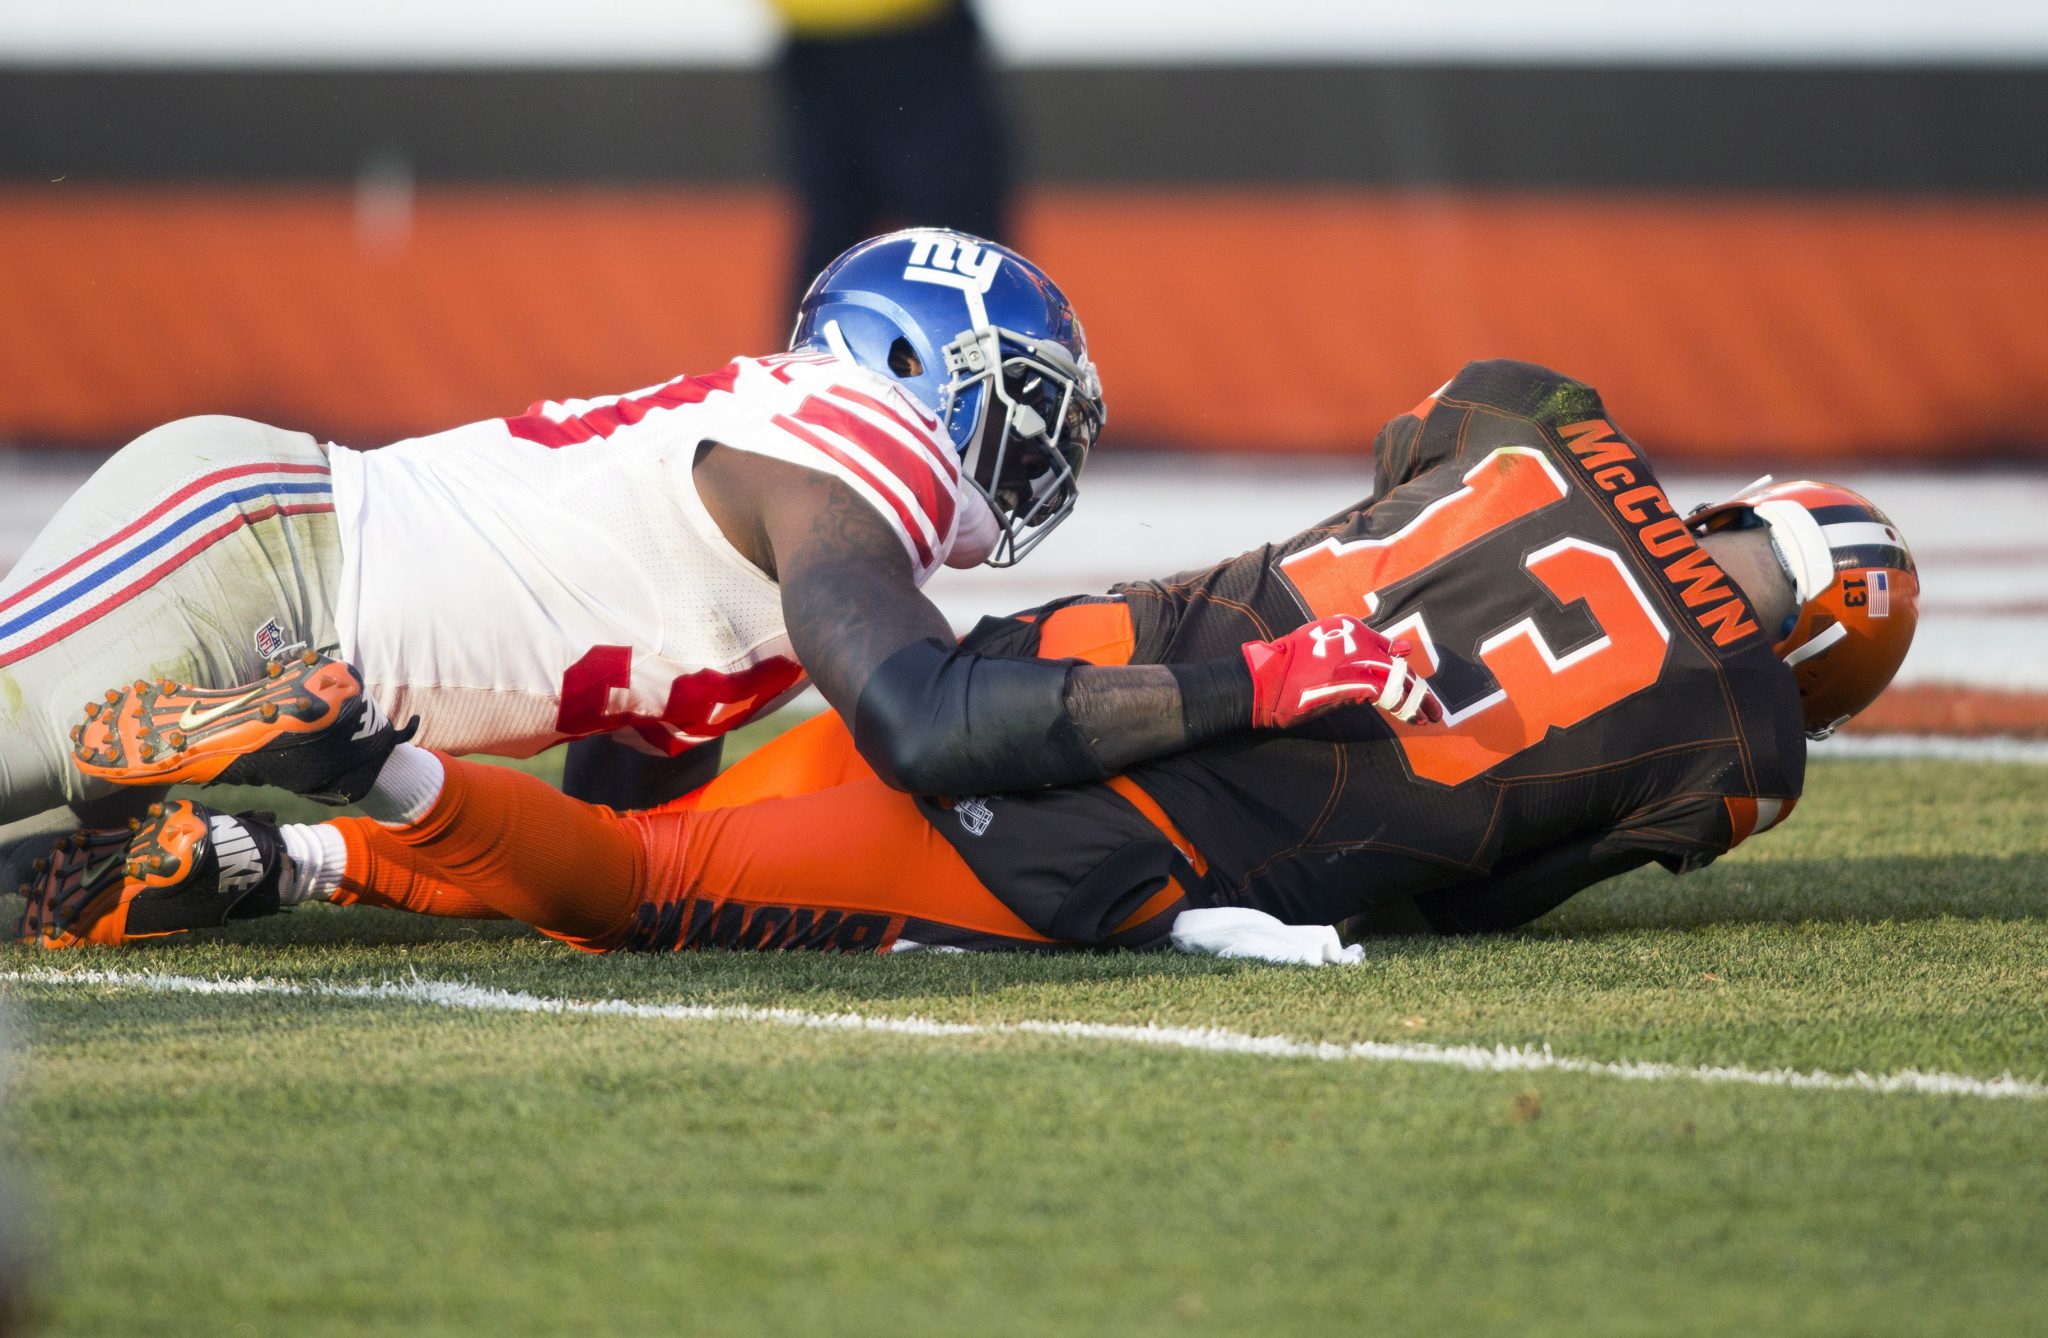 New York Giants: Jason Pierre-Paul named NFC Defensive Player of the Week 1